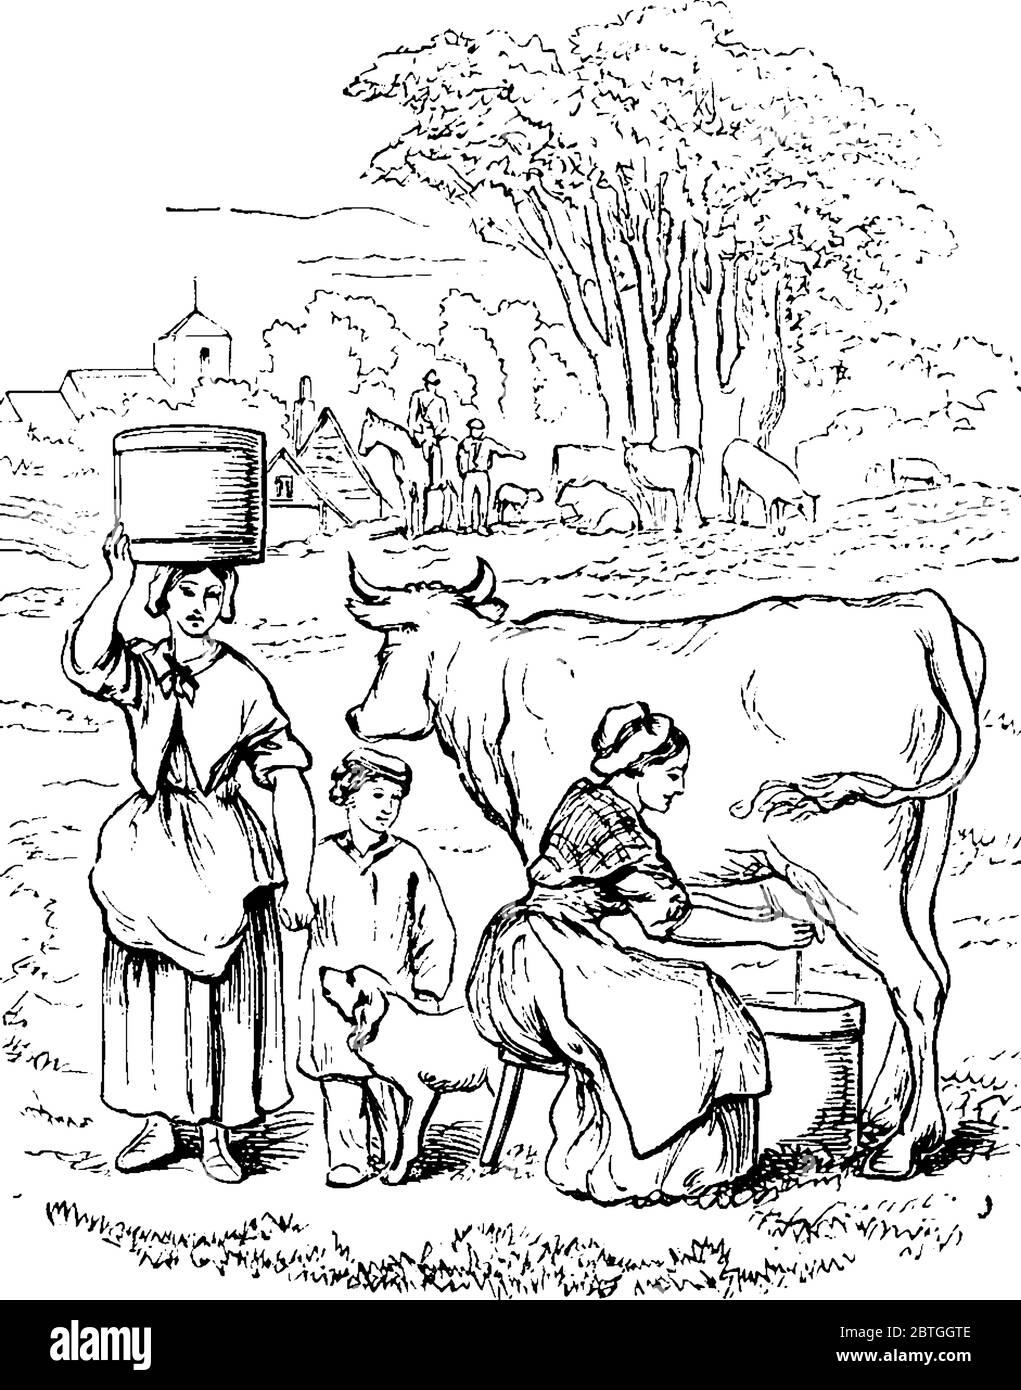 A lady with a container on head, holding the hand of a small boy, and both looking at a woman milking a cow on the farm, vintage line drawing or engra Stock Vector